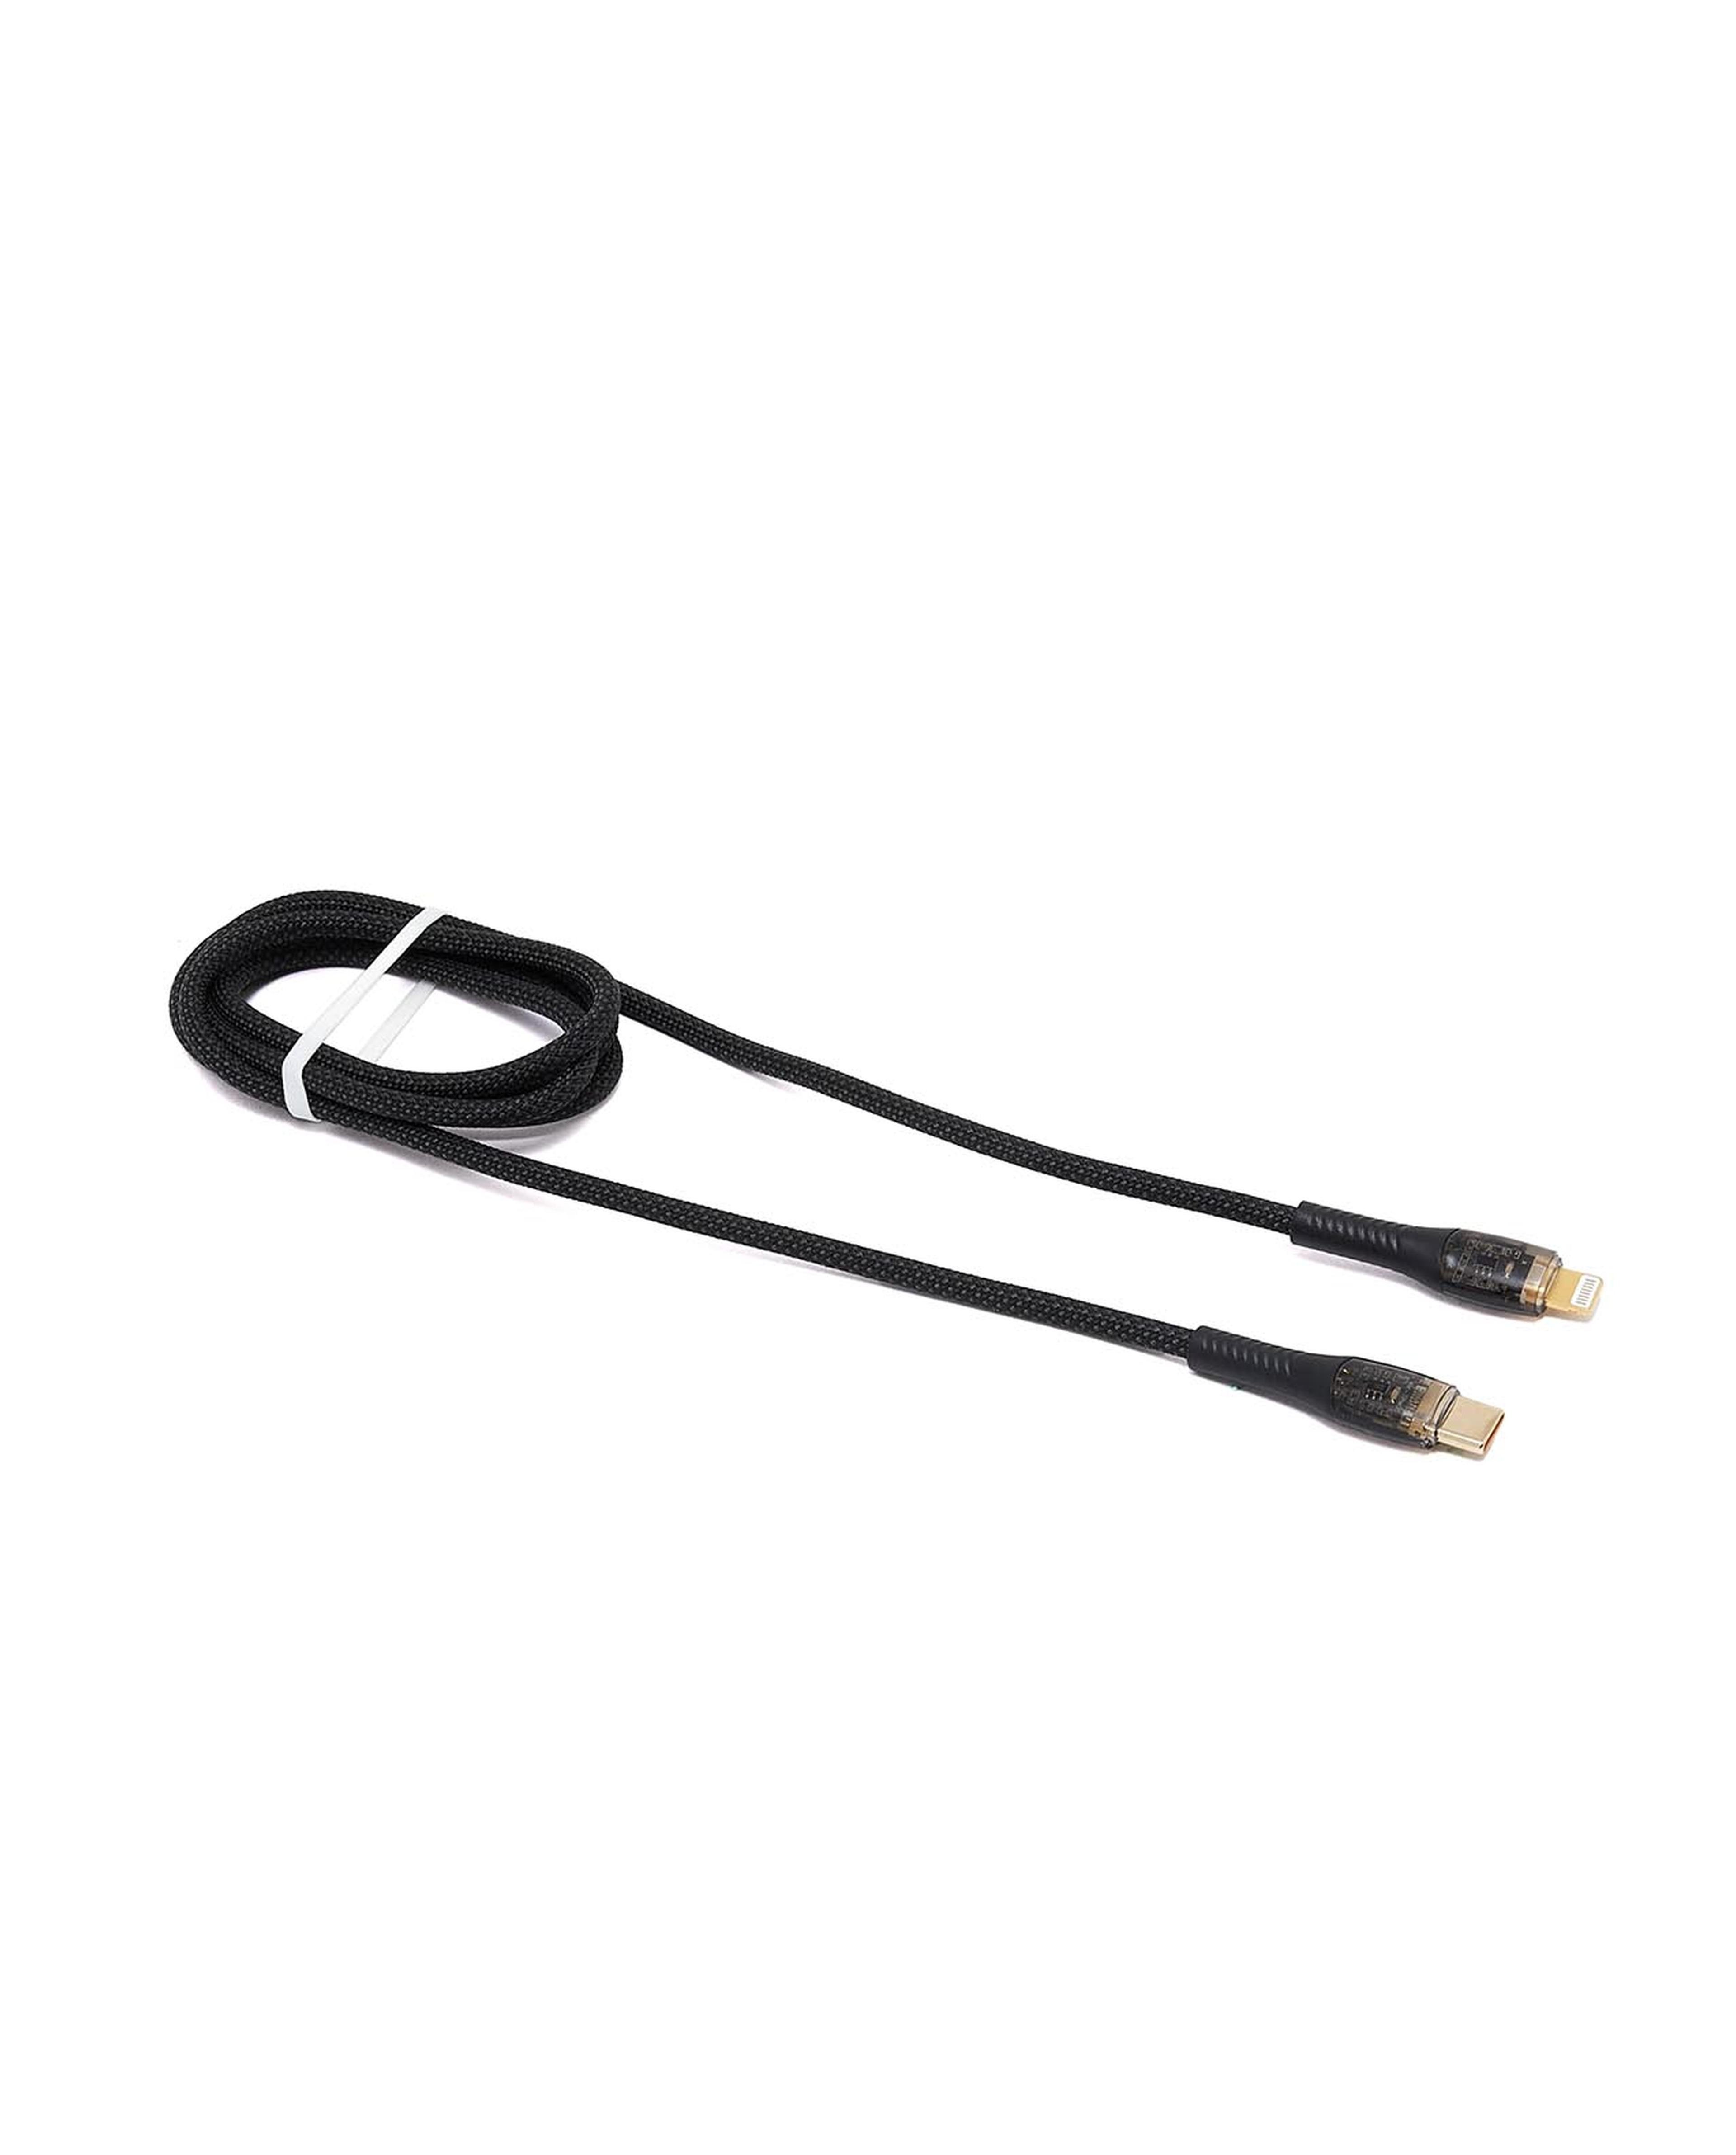 USB-C to Lightening Cable